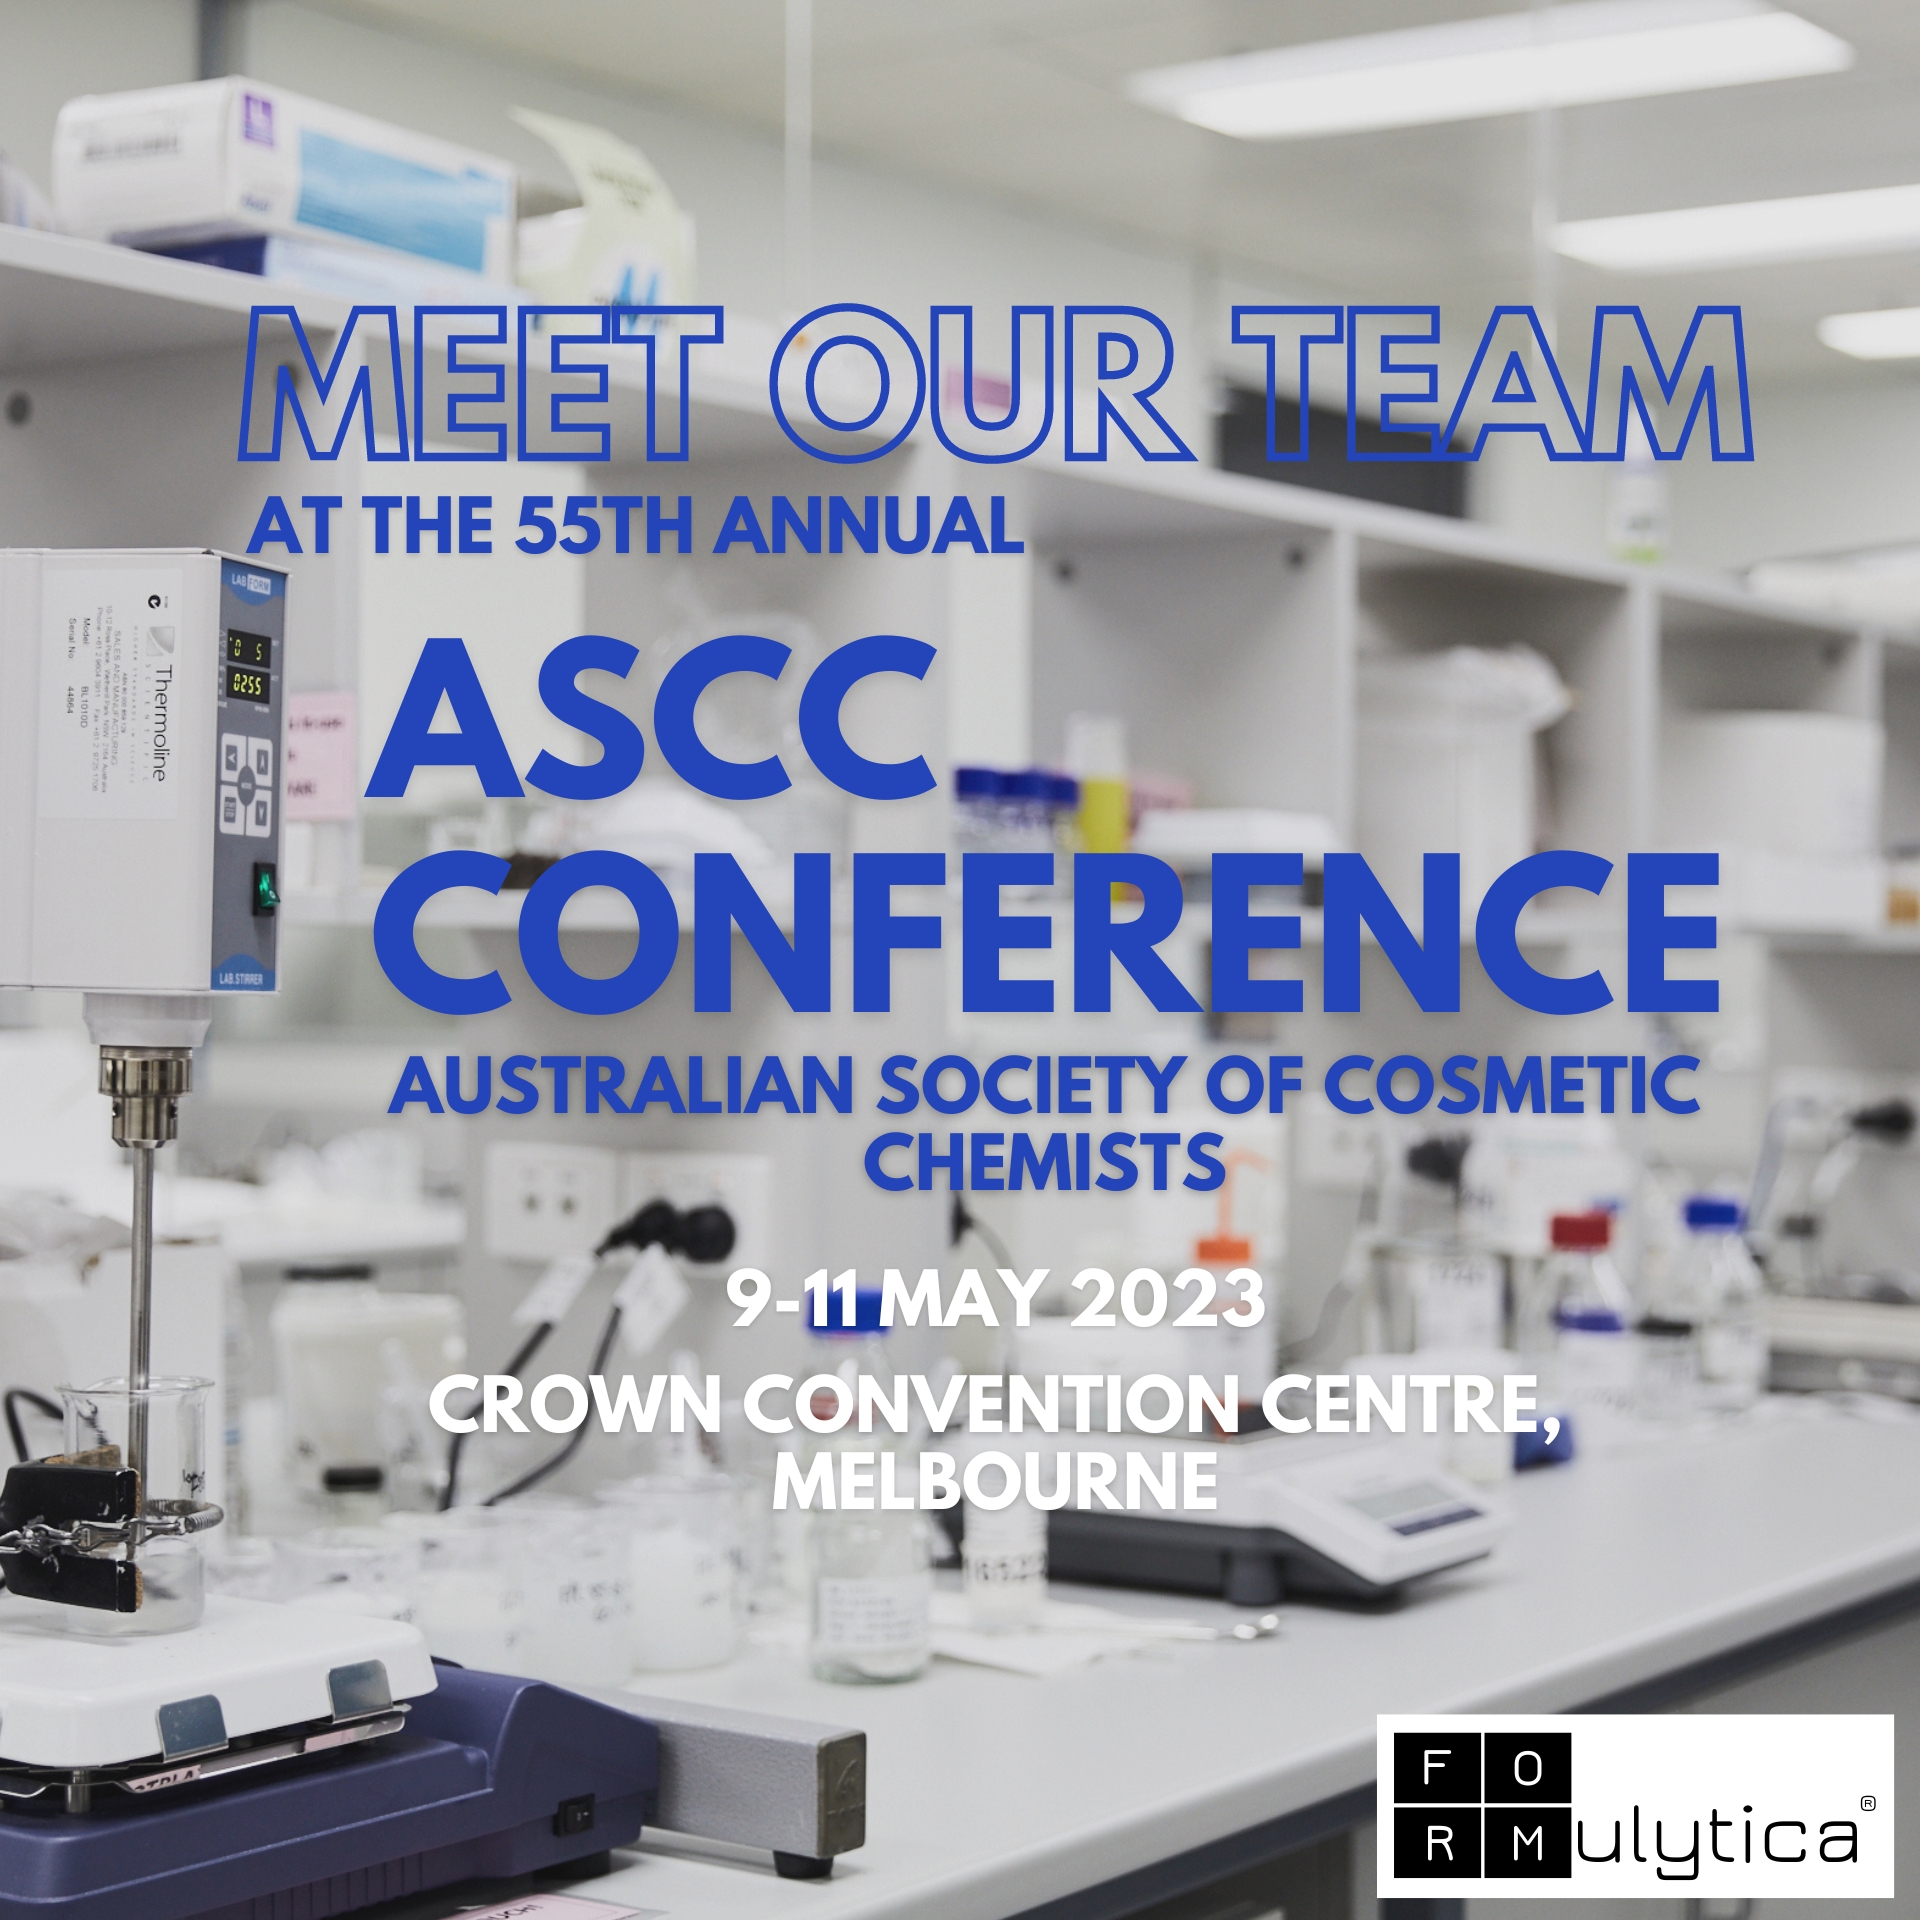 Meet our team at the 55th annual ASCC conference Formulytica